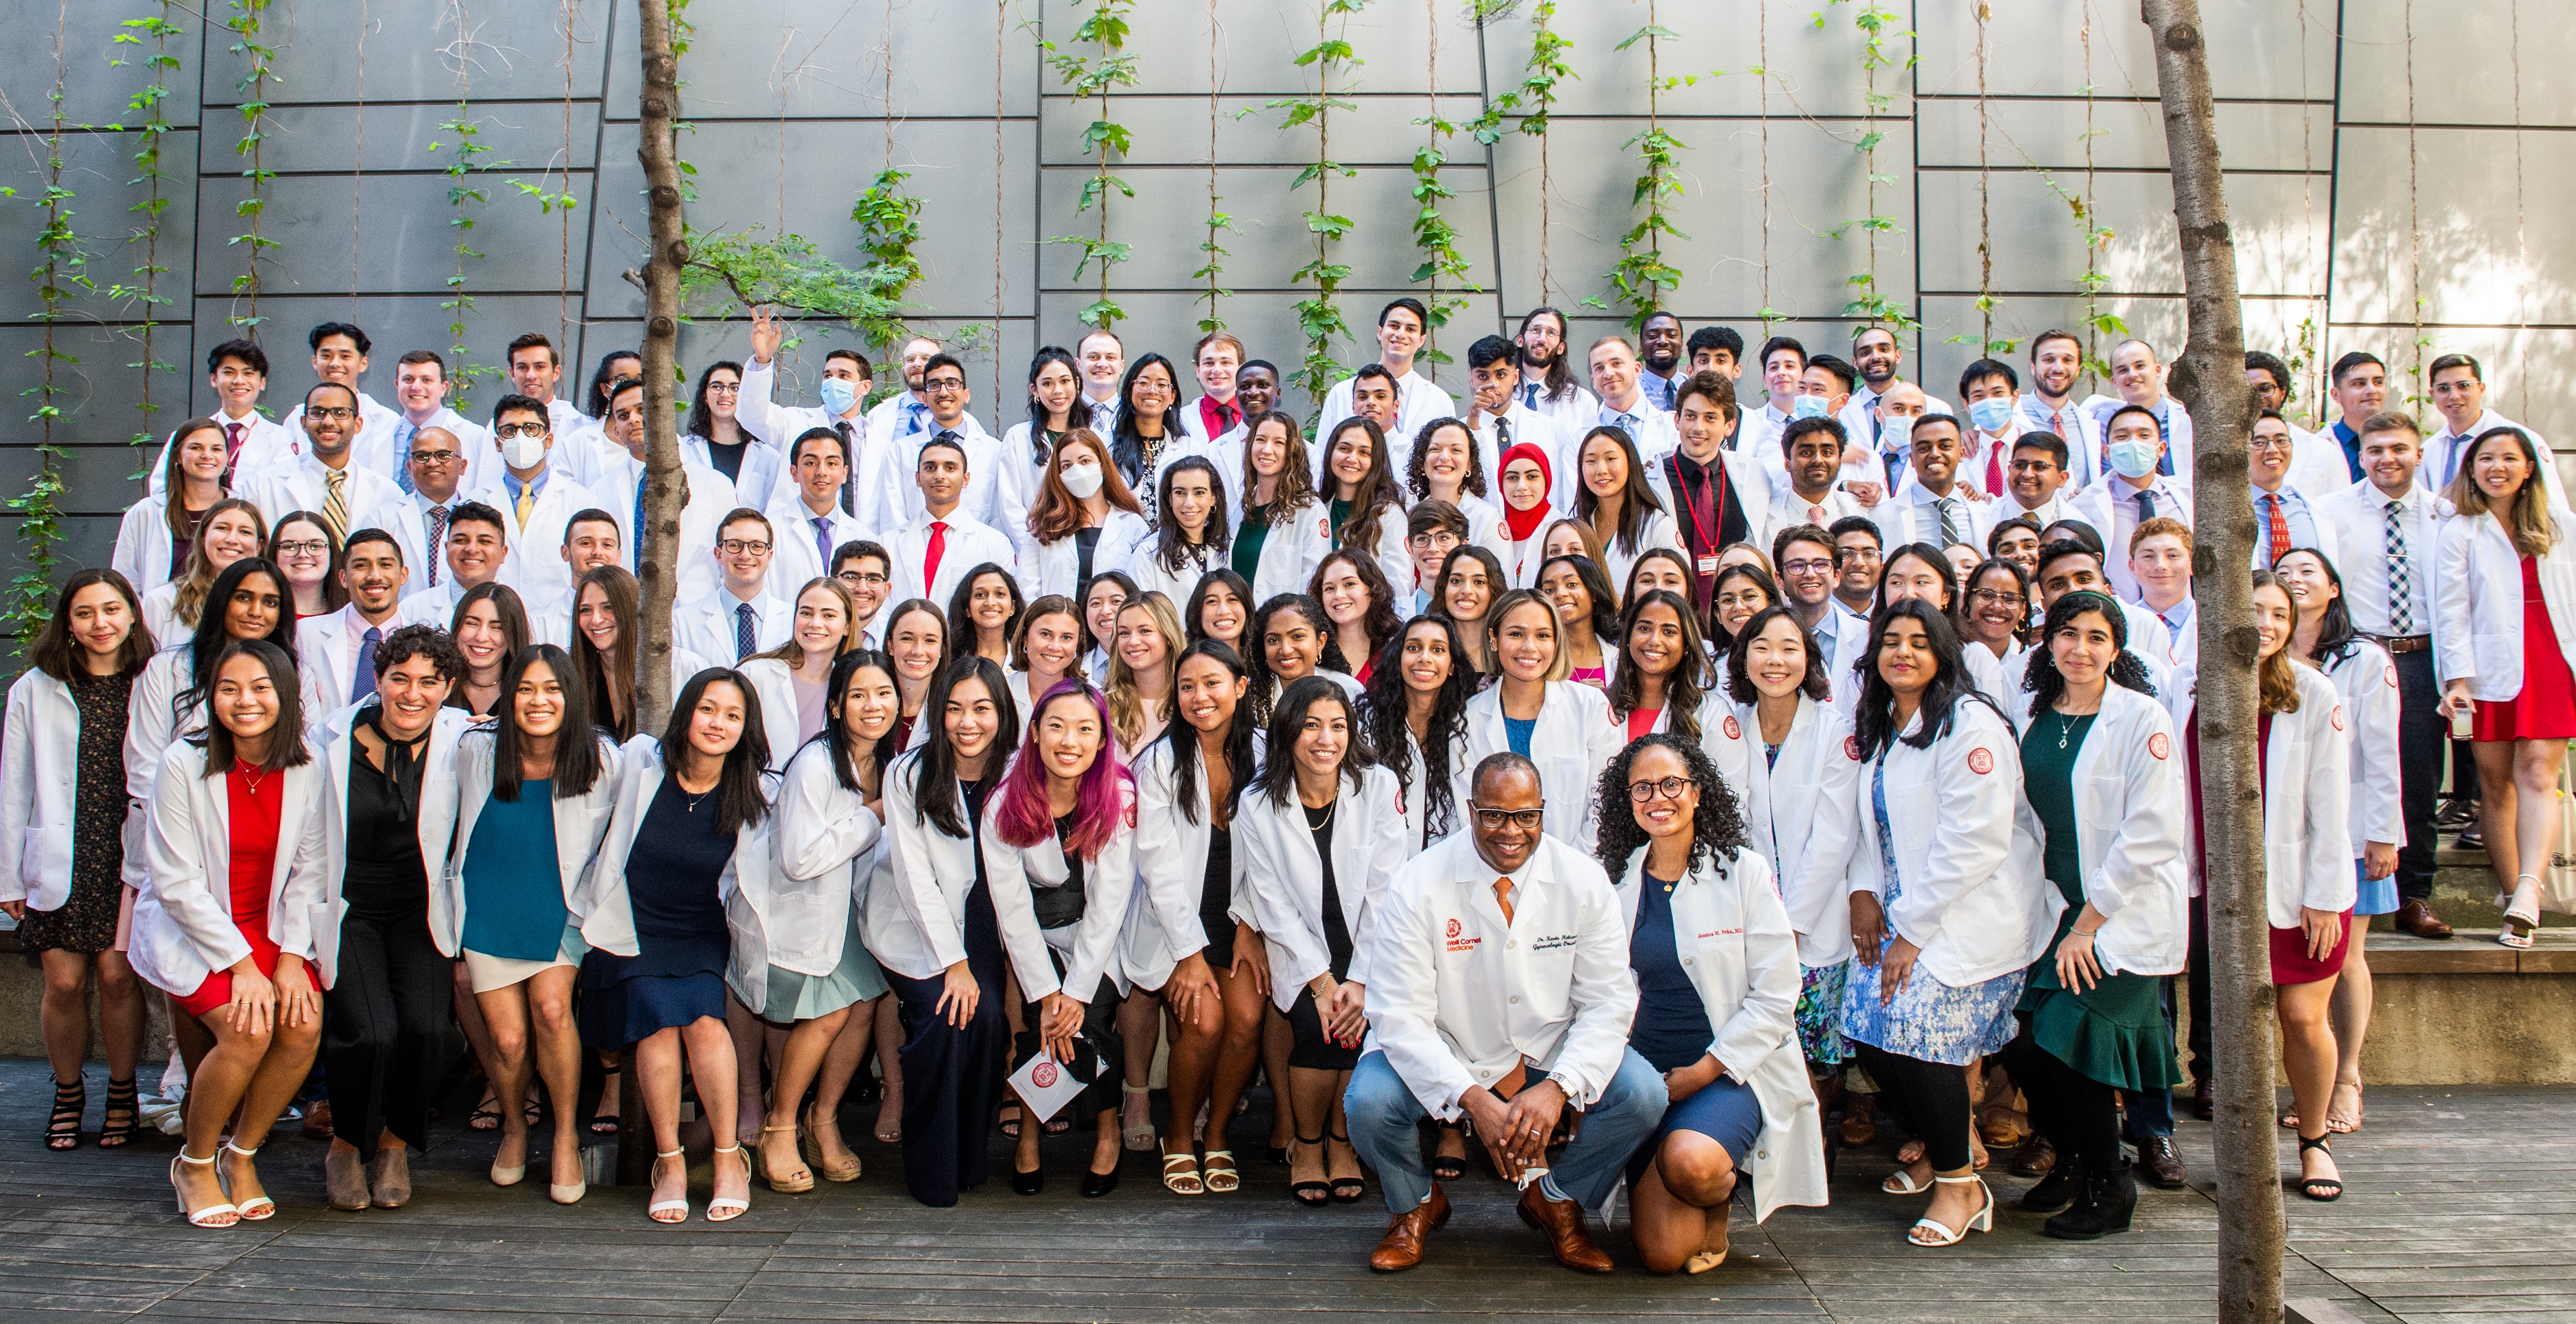 The Class of 2026 at Weill Cornell Medicine’s annual White Coat Ceremony on Aug. 16, 2022. All photos by Studio Brooke.